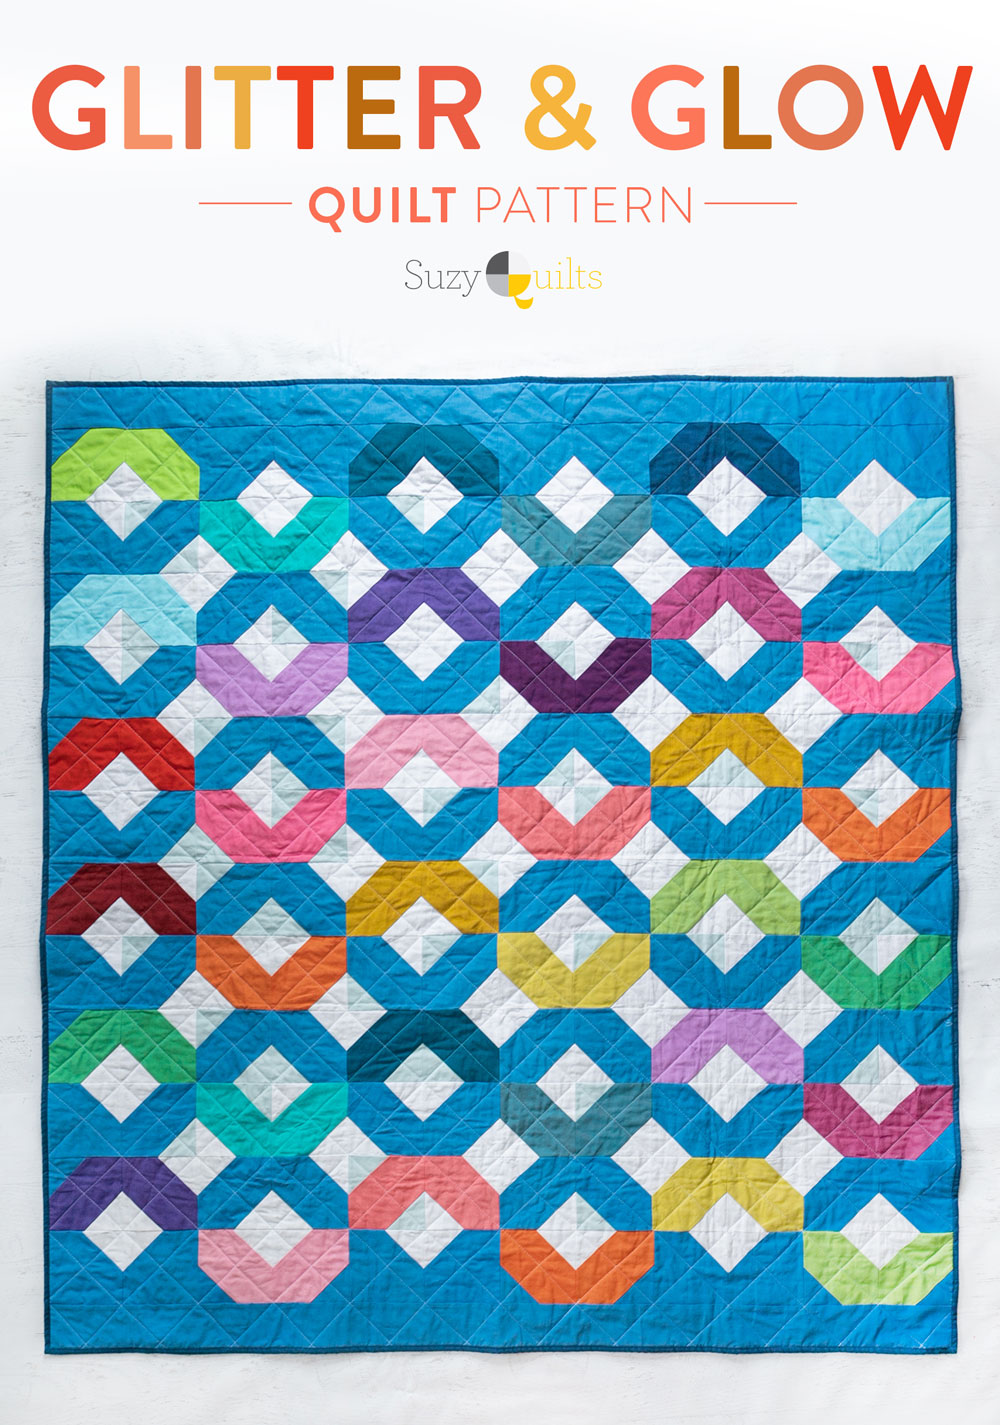 Make a Rainbow Quilt using this simple alteration to the Glitter & Glow quilt pattern. This is fat quarter friendly and great for newbie quilters and beginners. suzyquilts.com #rainbowquilt #rainbowbabyquilt